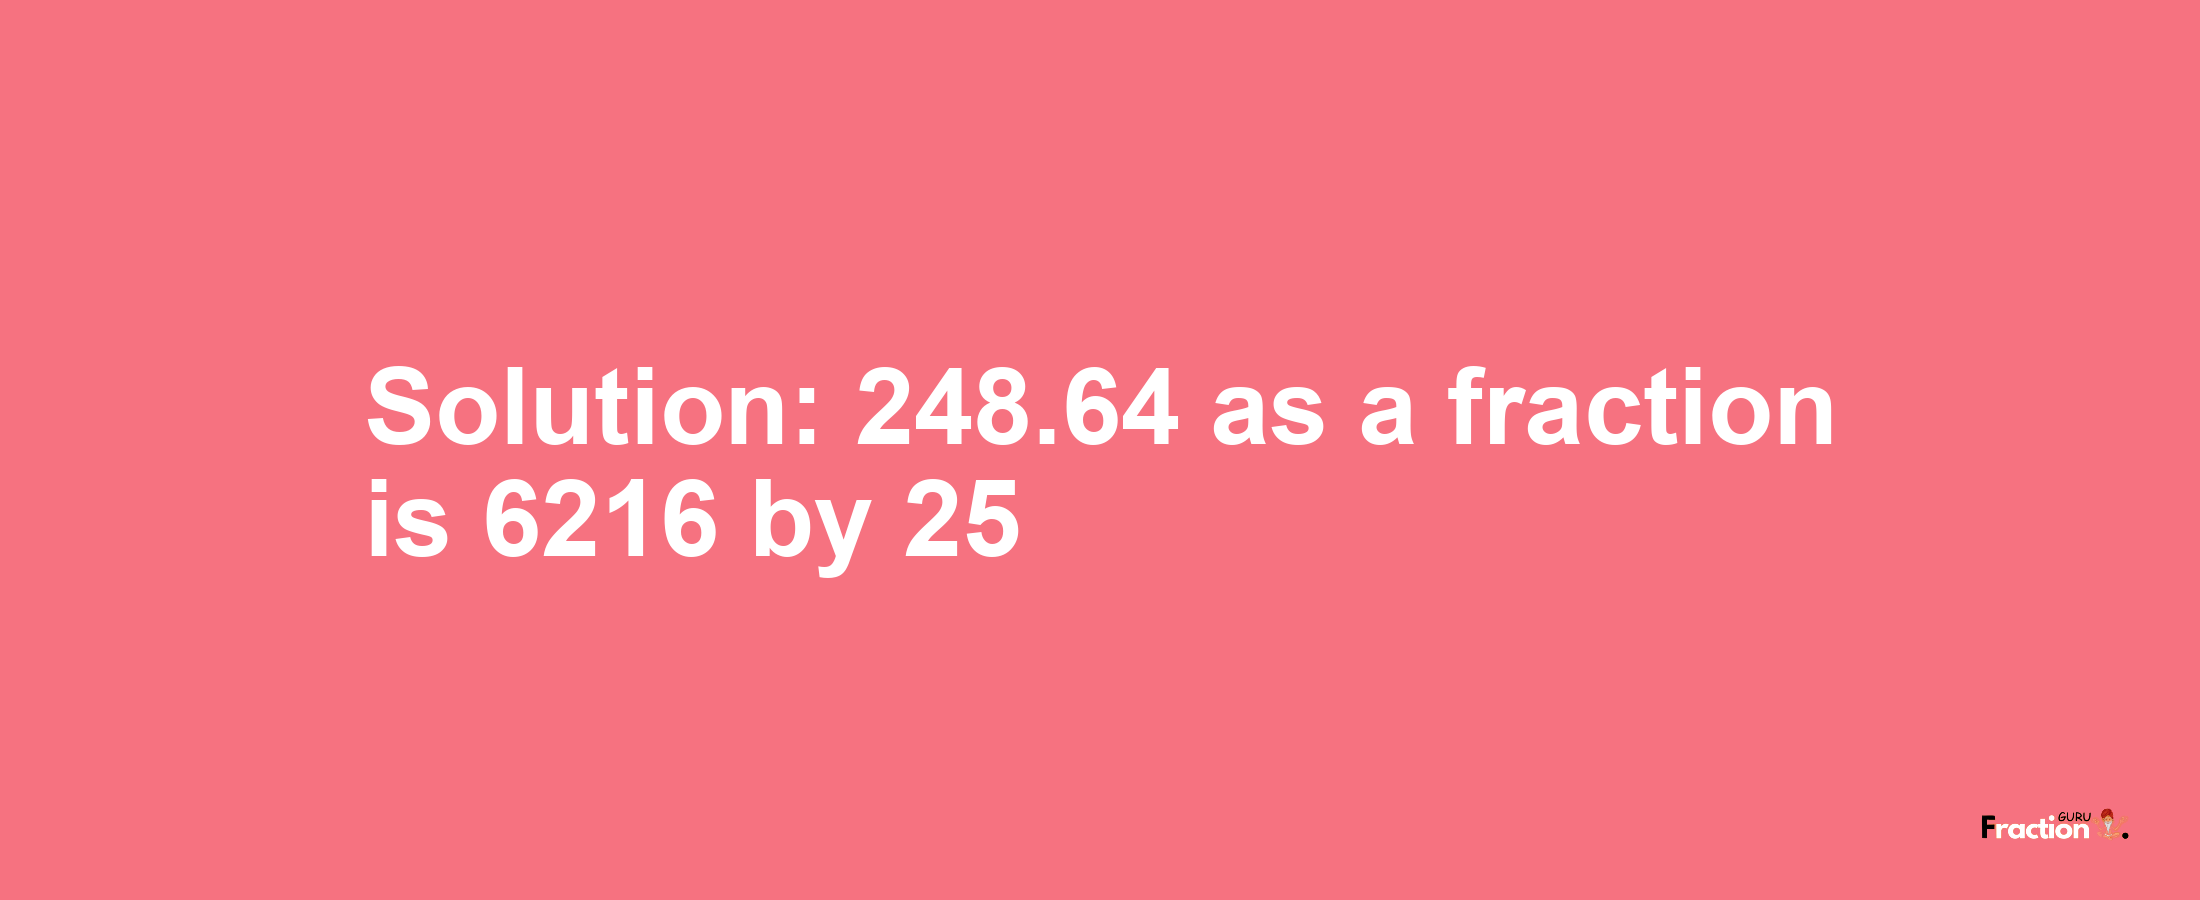 Solution:248.64 as a fraction is 6216/25